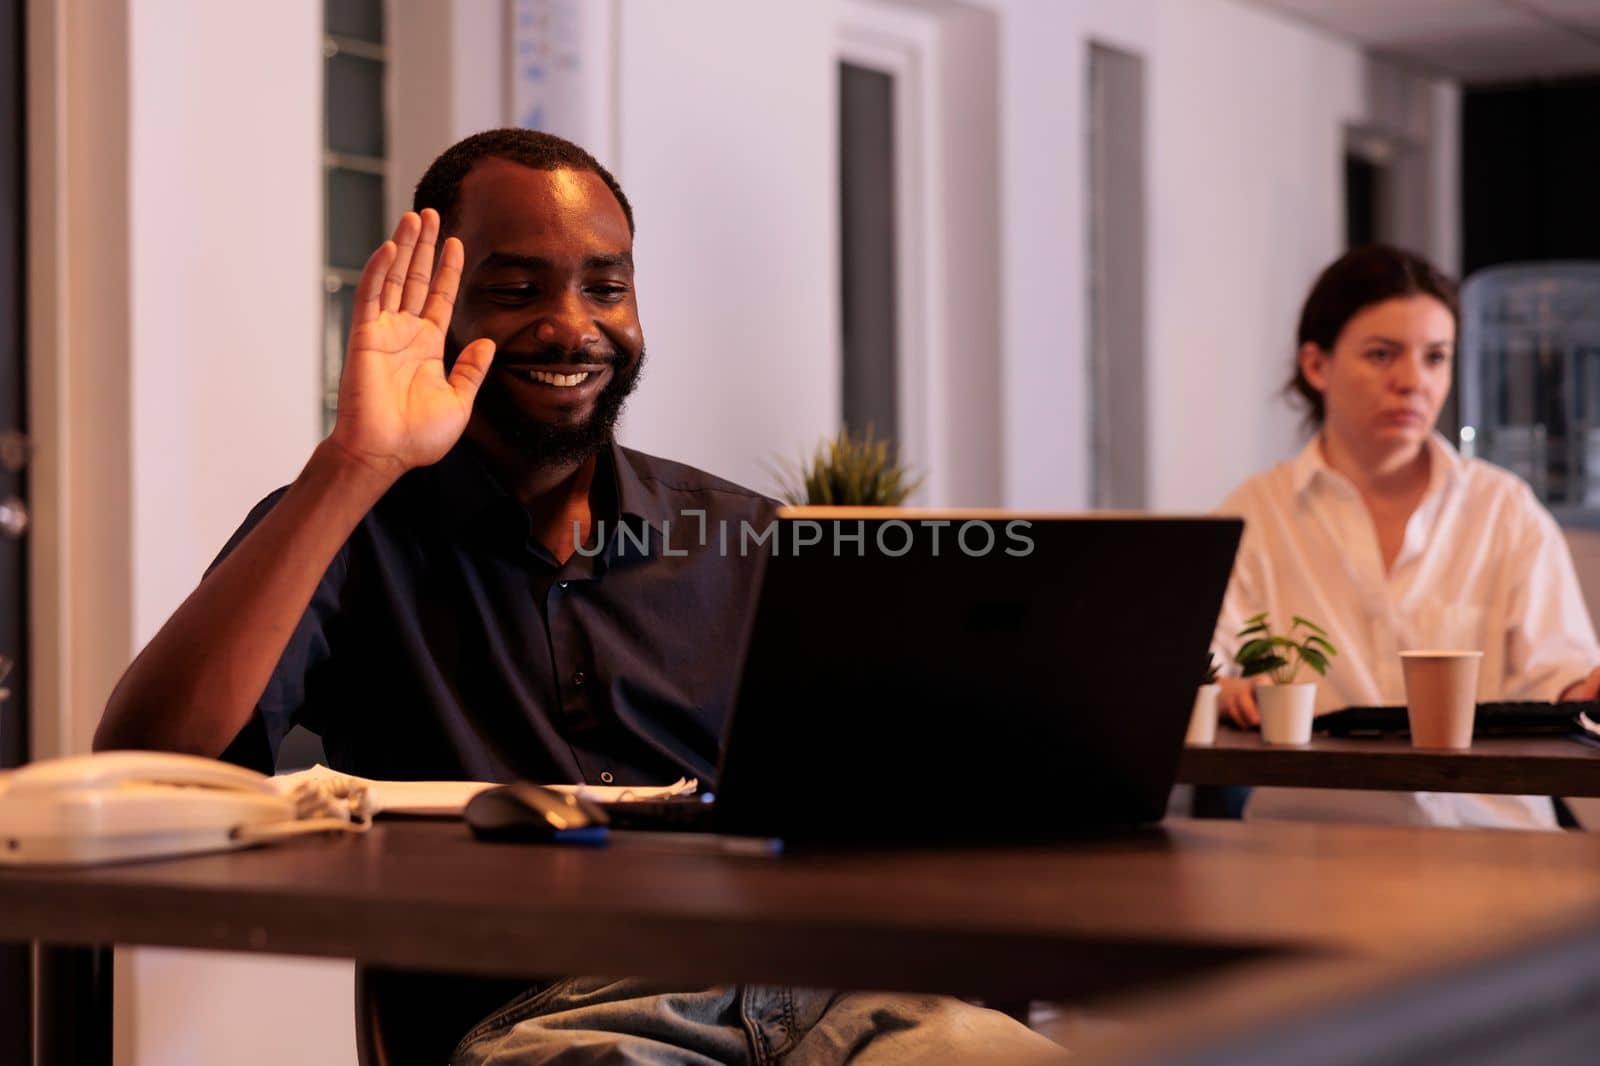 Smiling corporate worker talking on videocall, waving hi, employee answering teleconference call in office at night. African american man online communication in coworking space